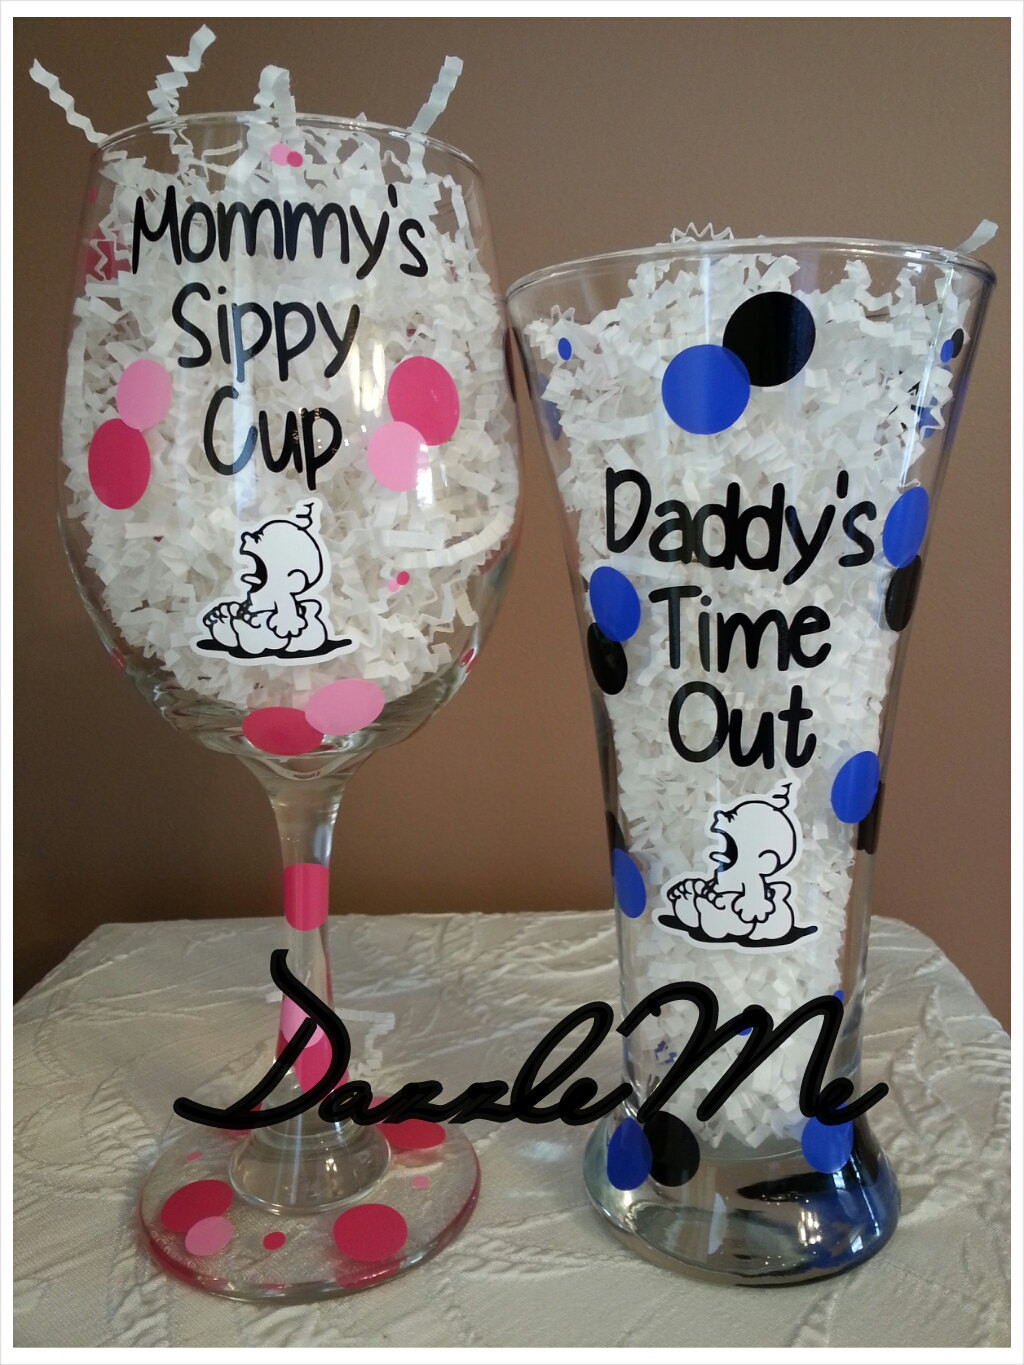 Cute Gifts For Baby Shower
 Cute Baby Shower Gift Mommys Sippy Cup & by DazzleMeByCamelle